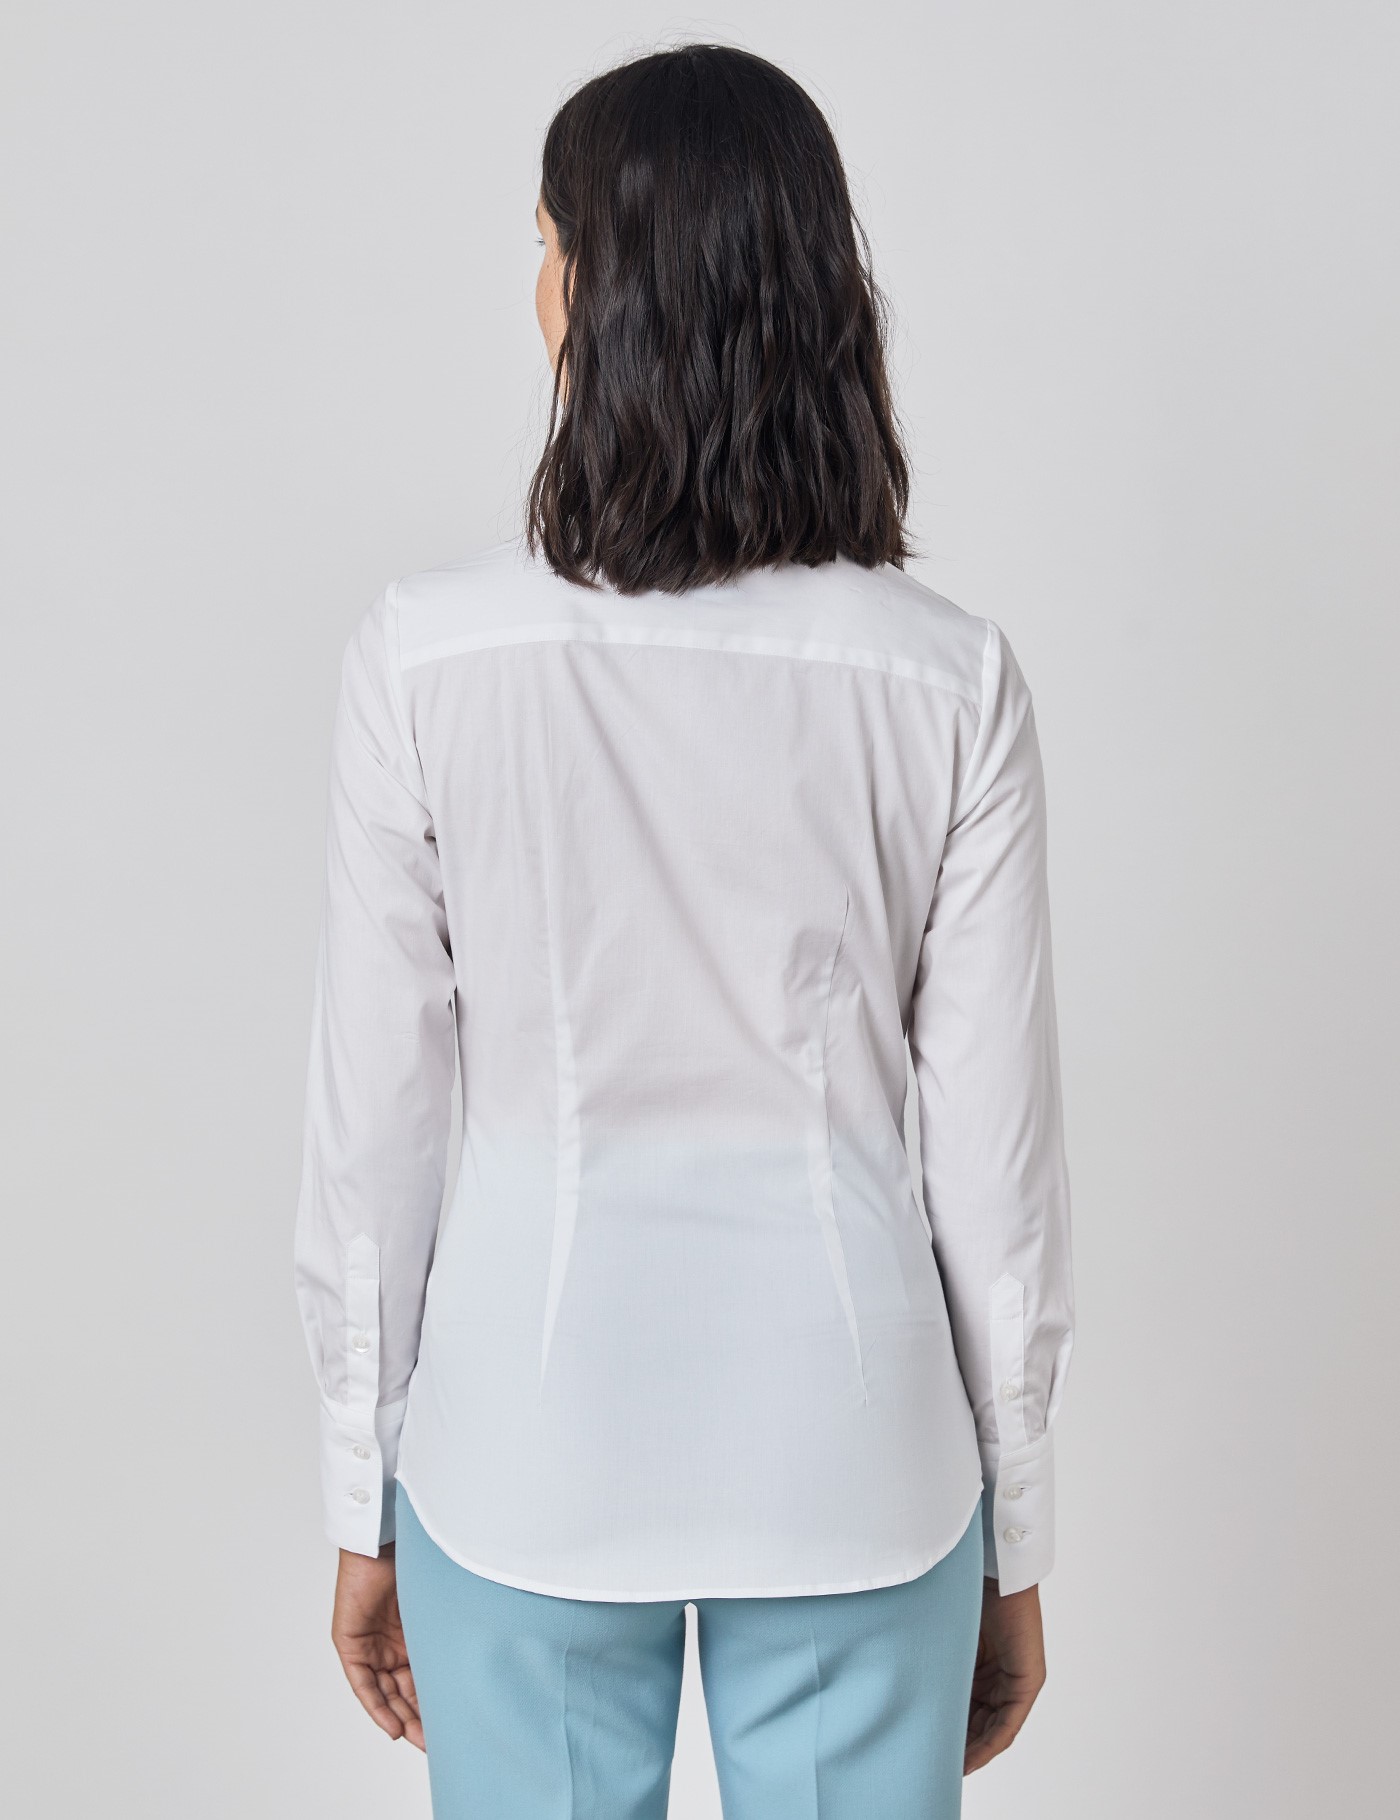 Cotton Stretch Plain Women S Fitted Shirt With Concealed Placket And Single Cuff In White